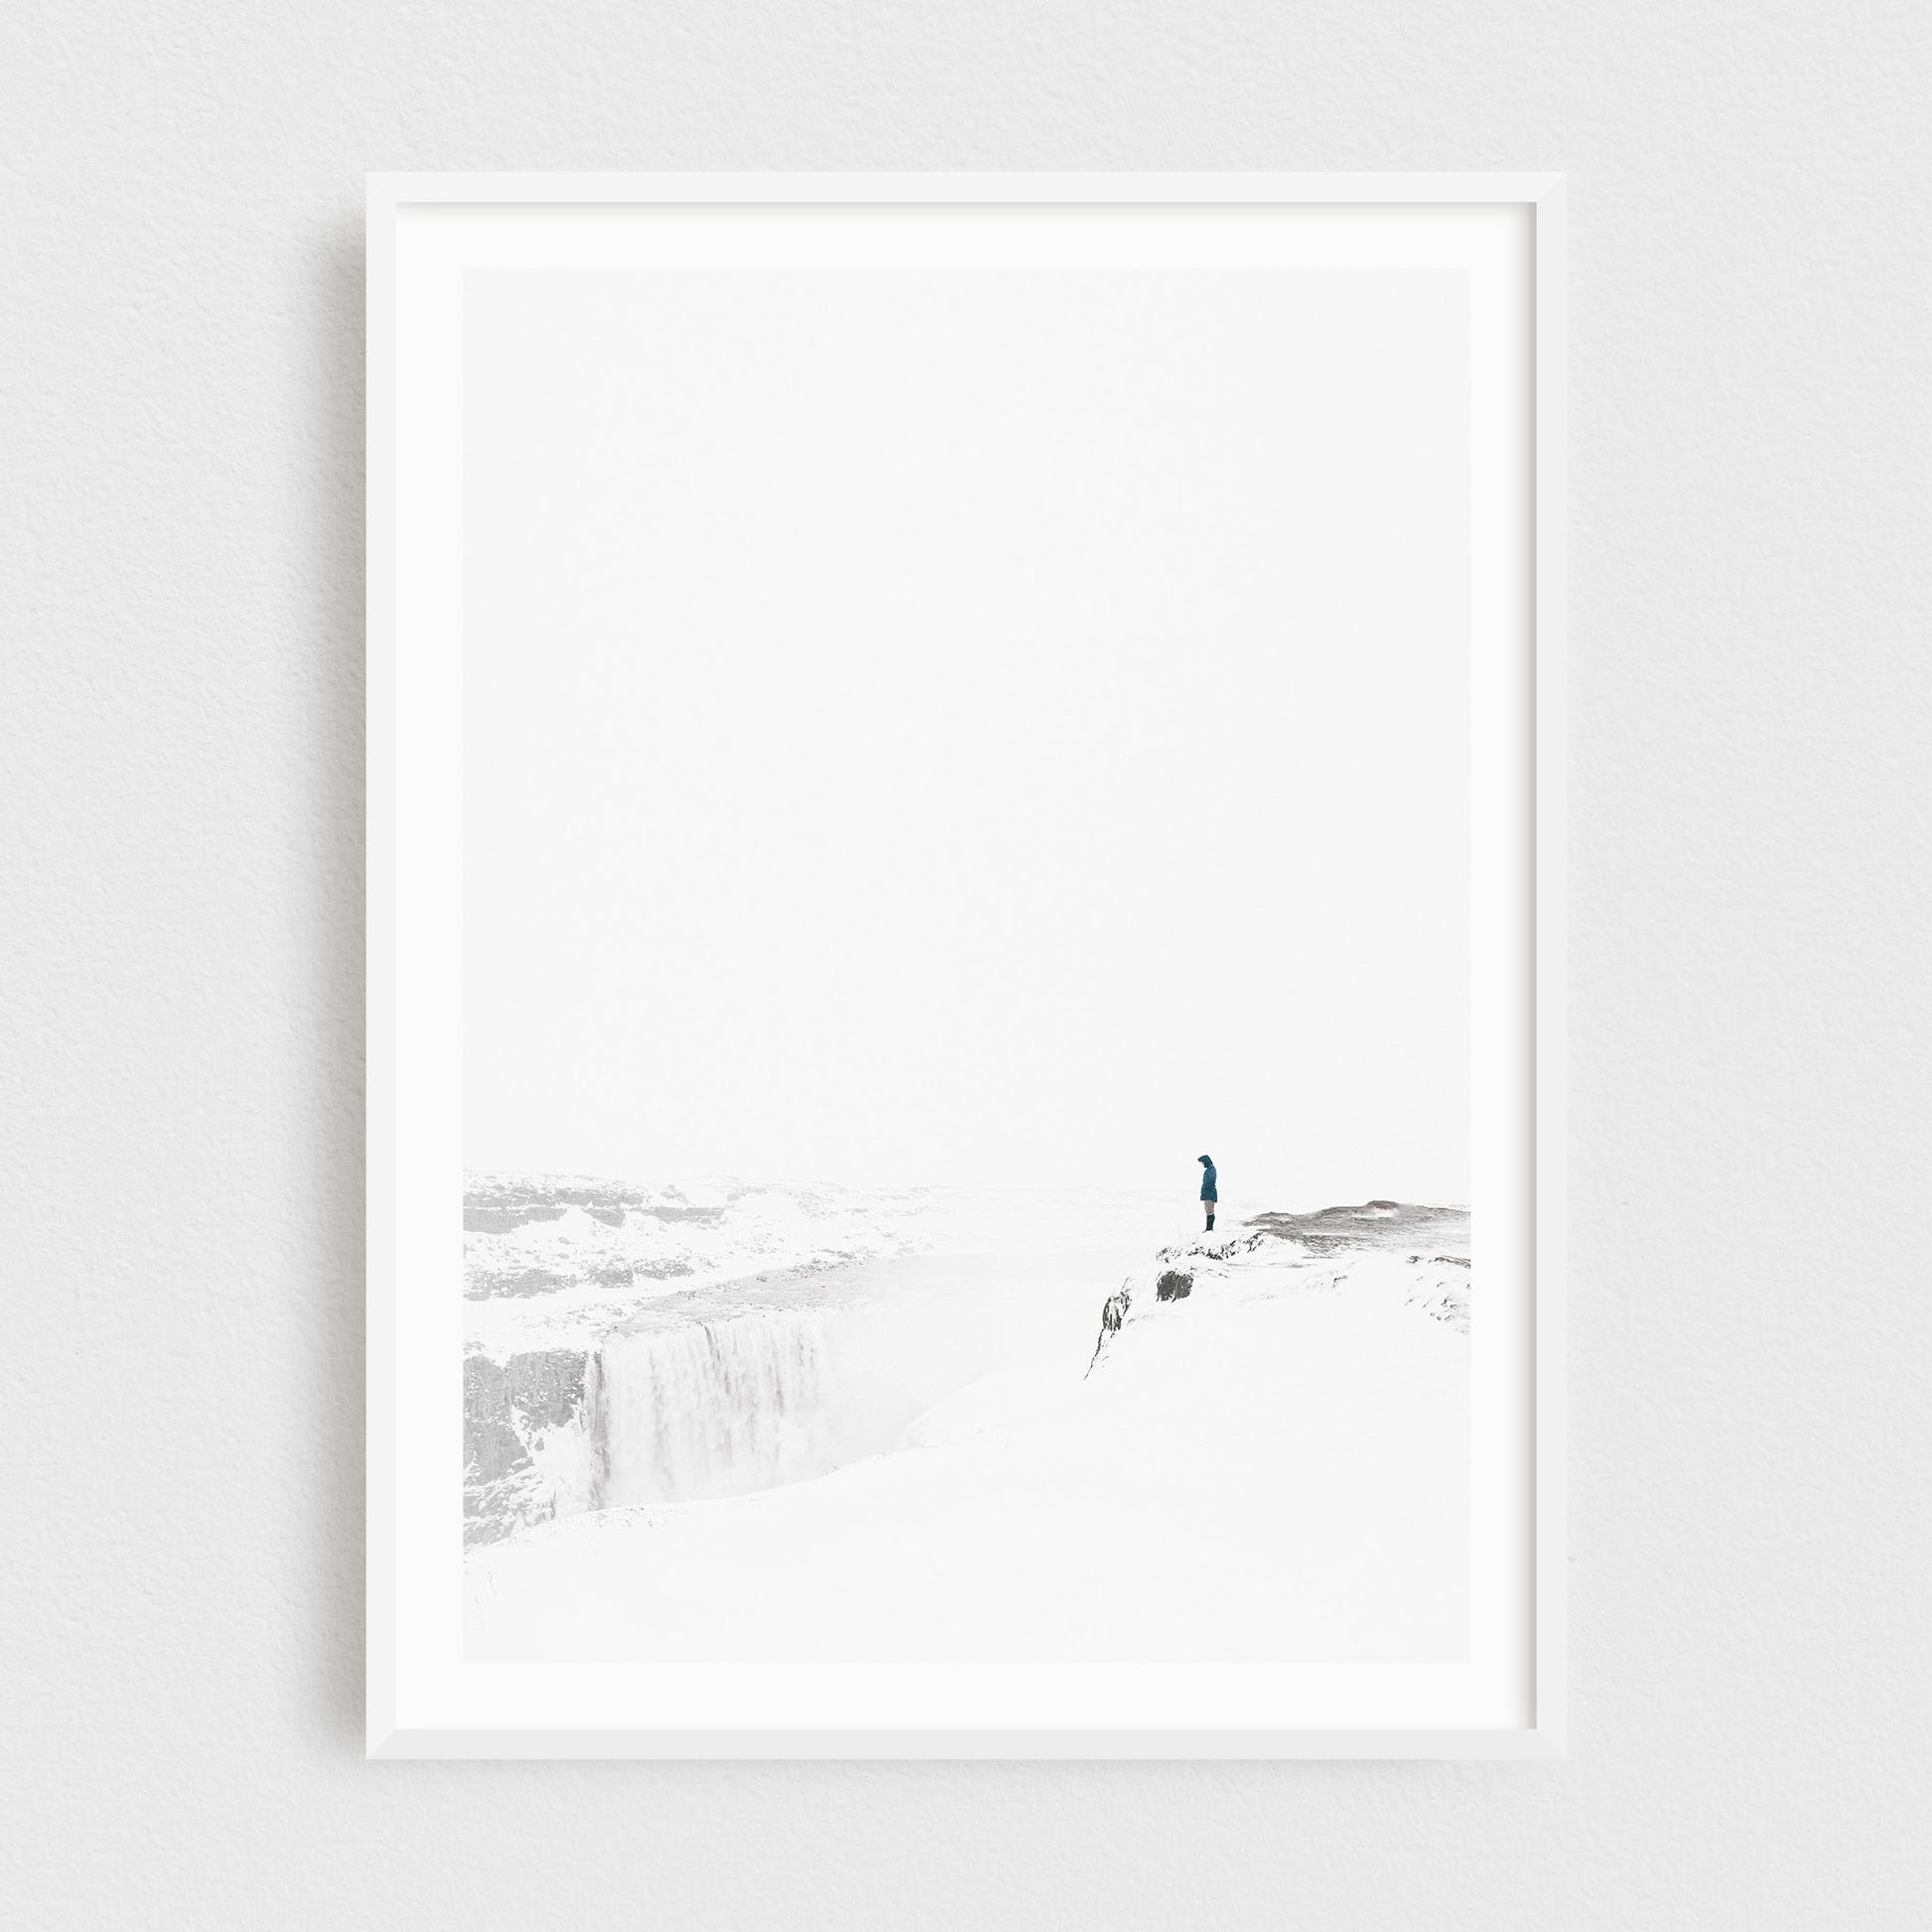 Iceland fine art photography print featuring Dettifoss waterfall in winter, in a white frame